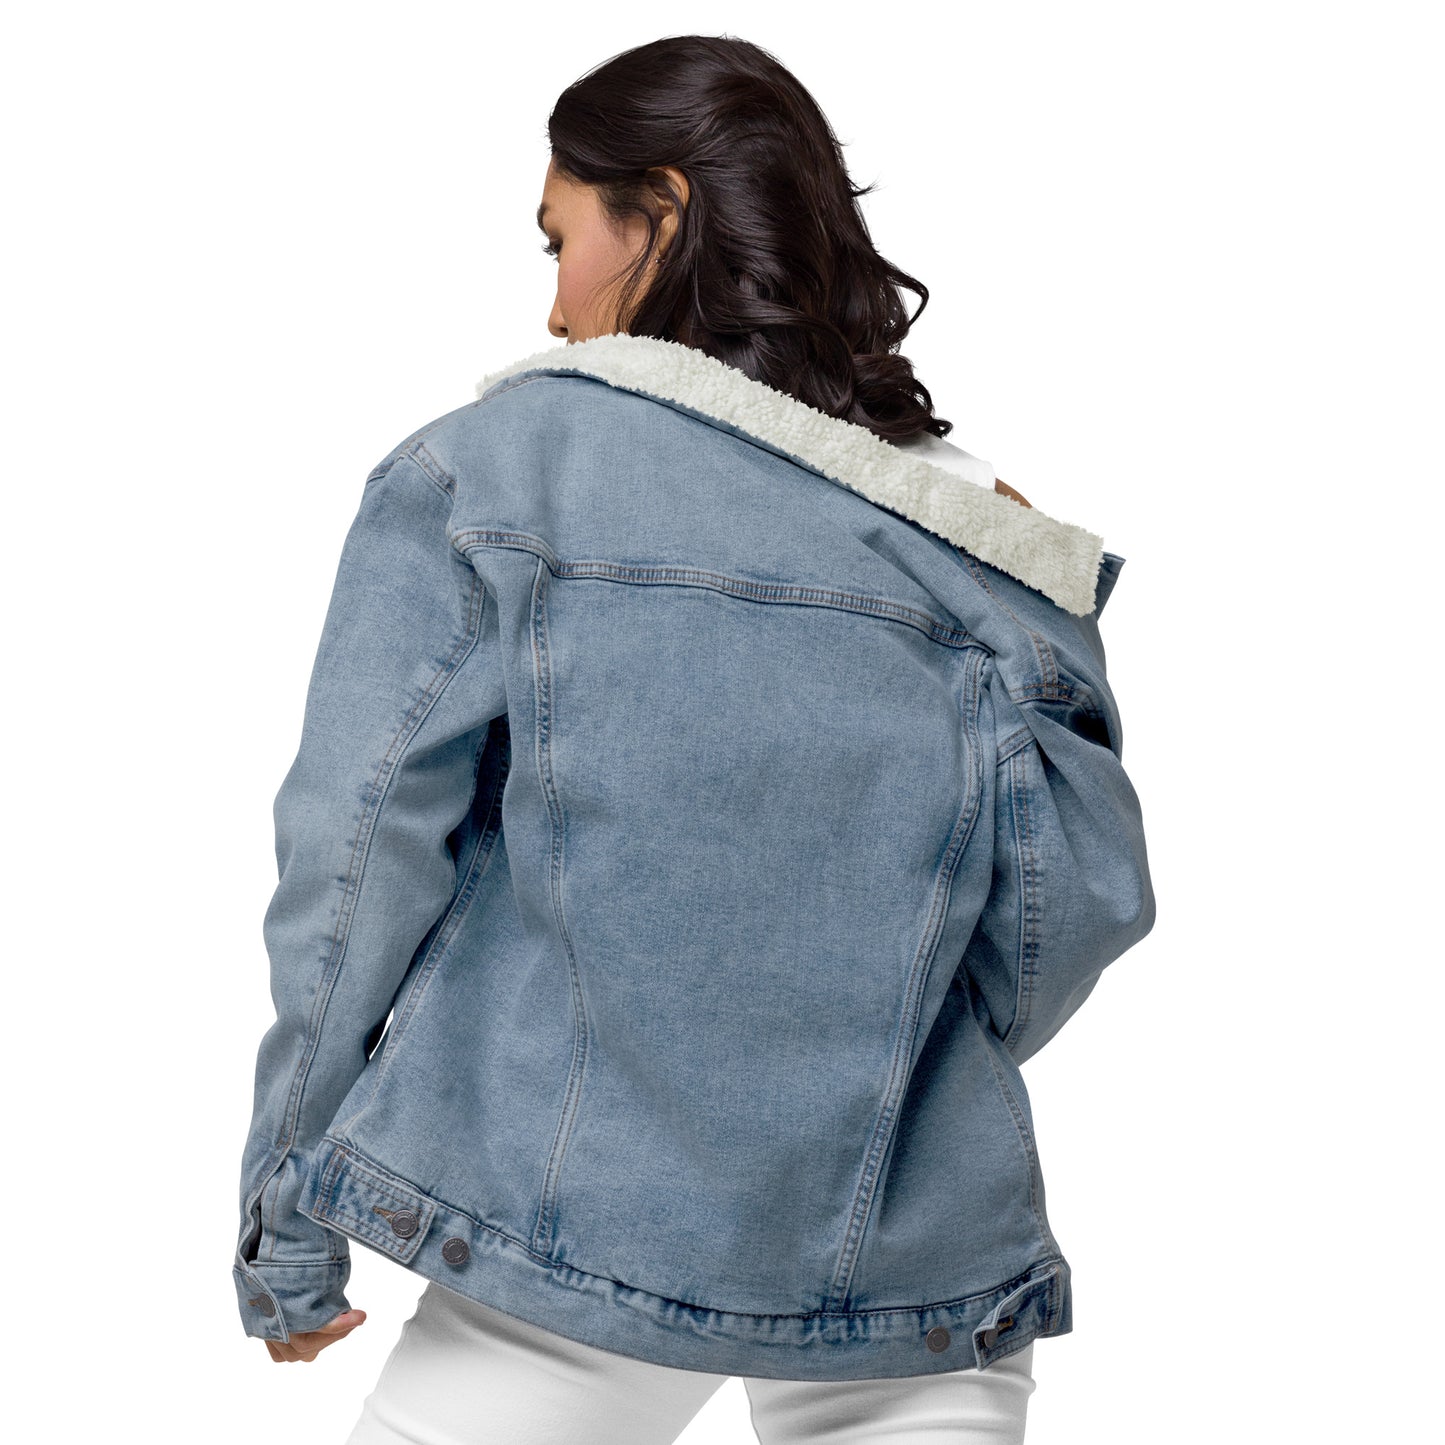 Relaxed fit denim sherpa jacket